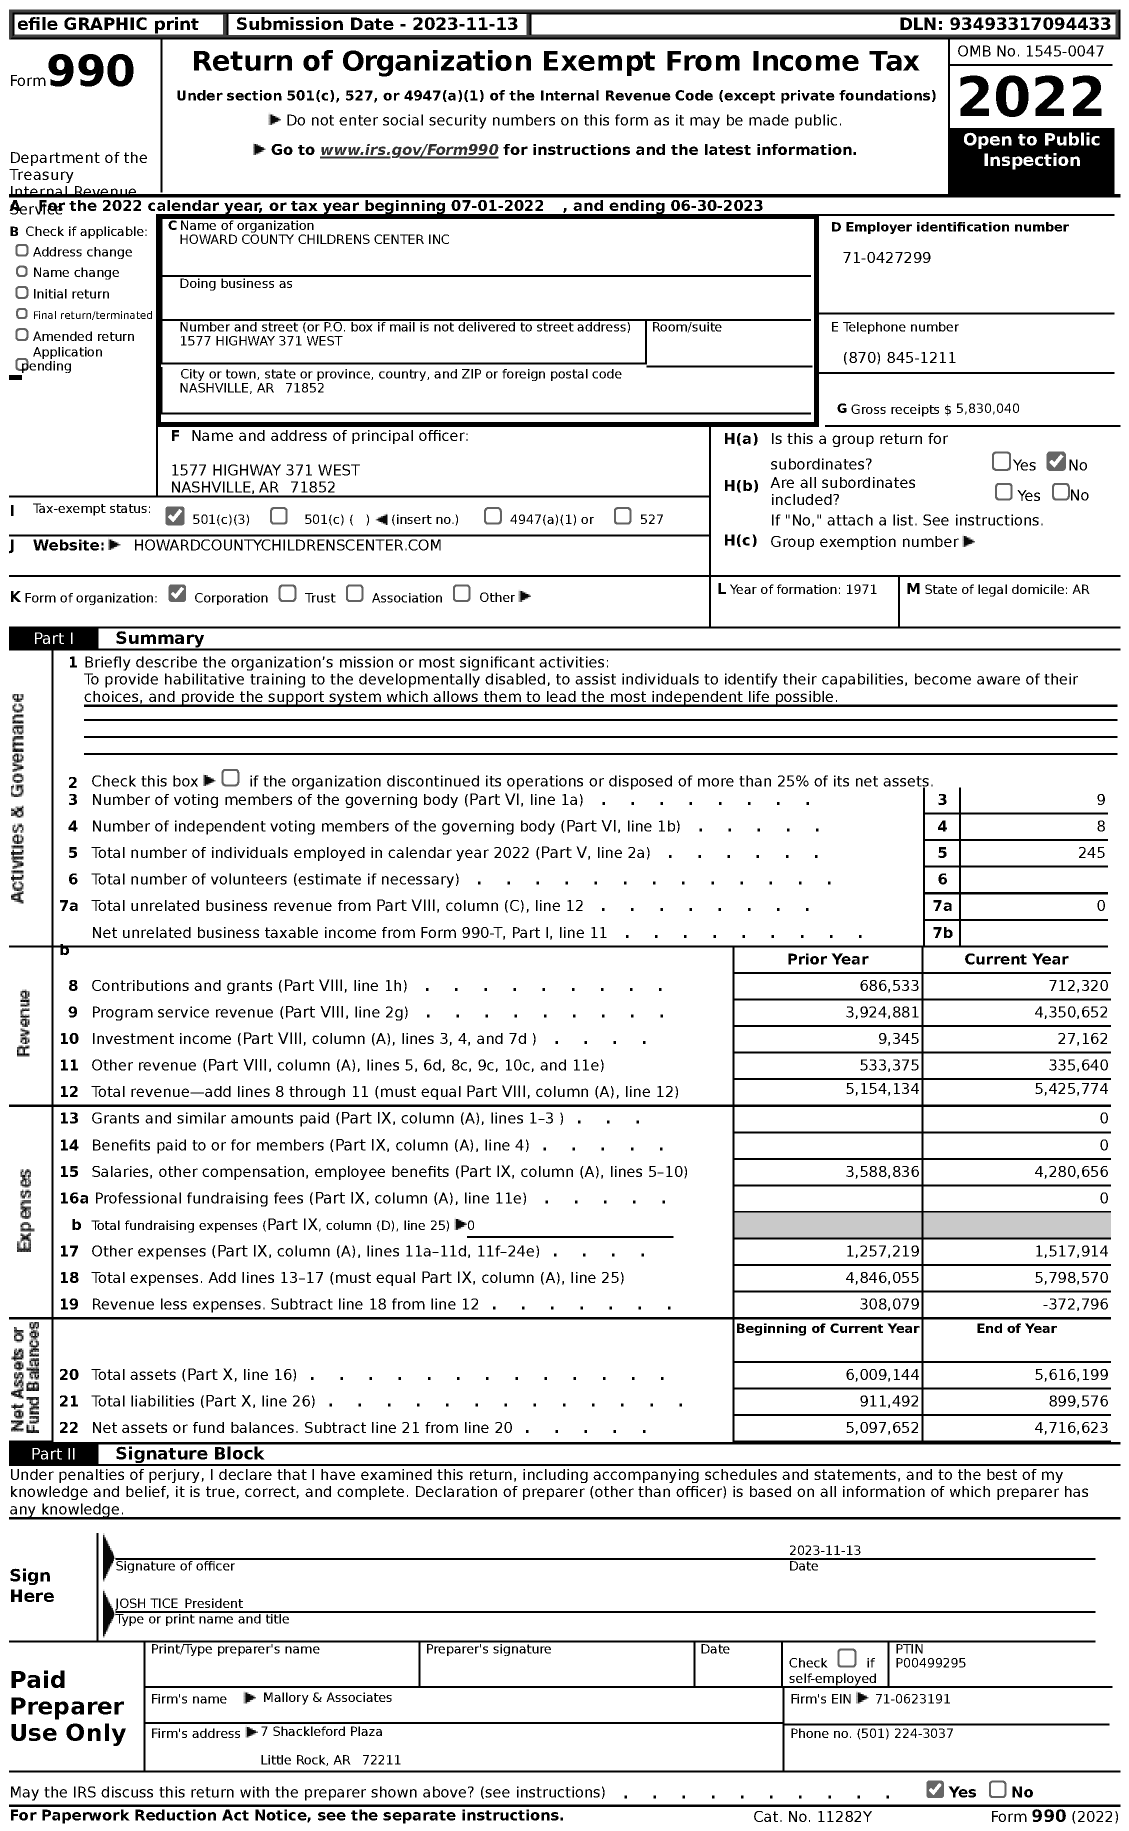 Image of first page of 2022 Form 990 for Howard County Children's Center (HCCC)